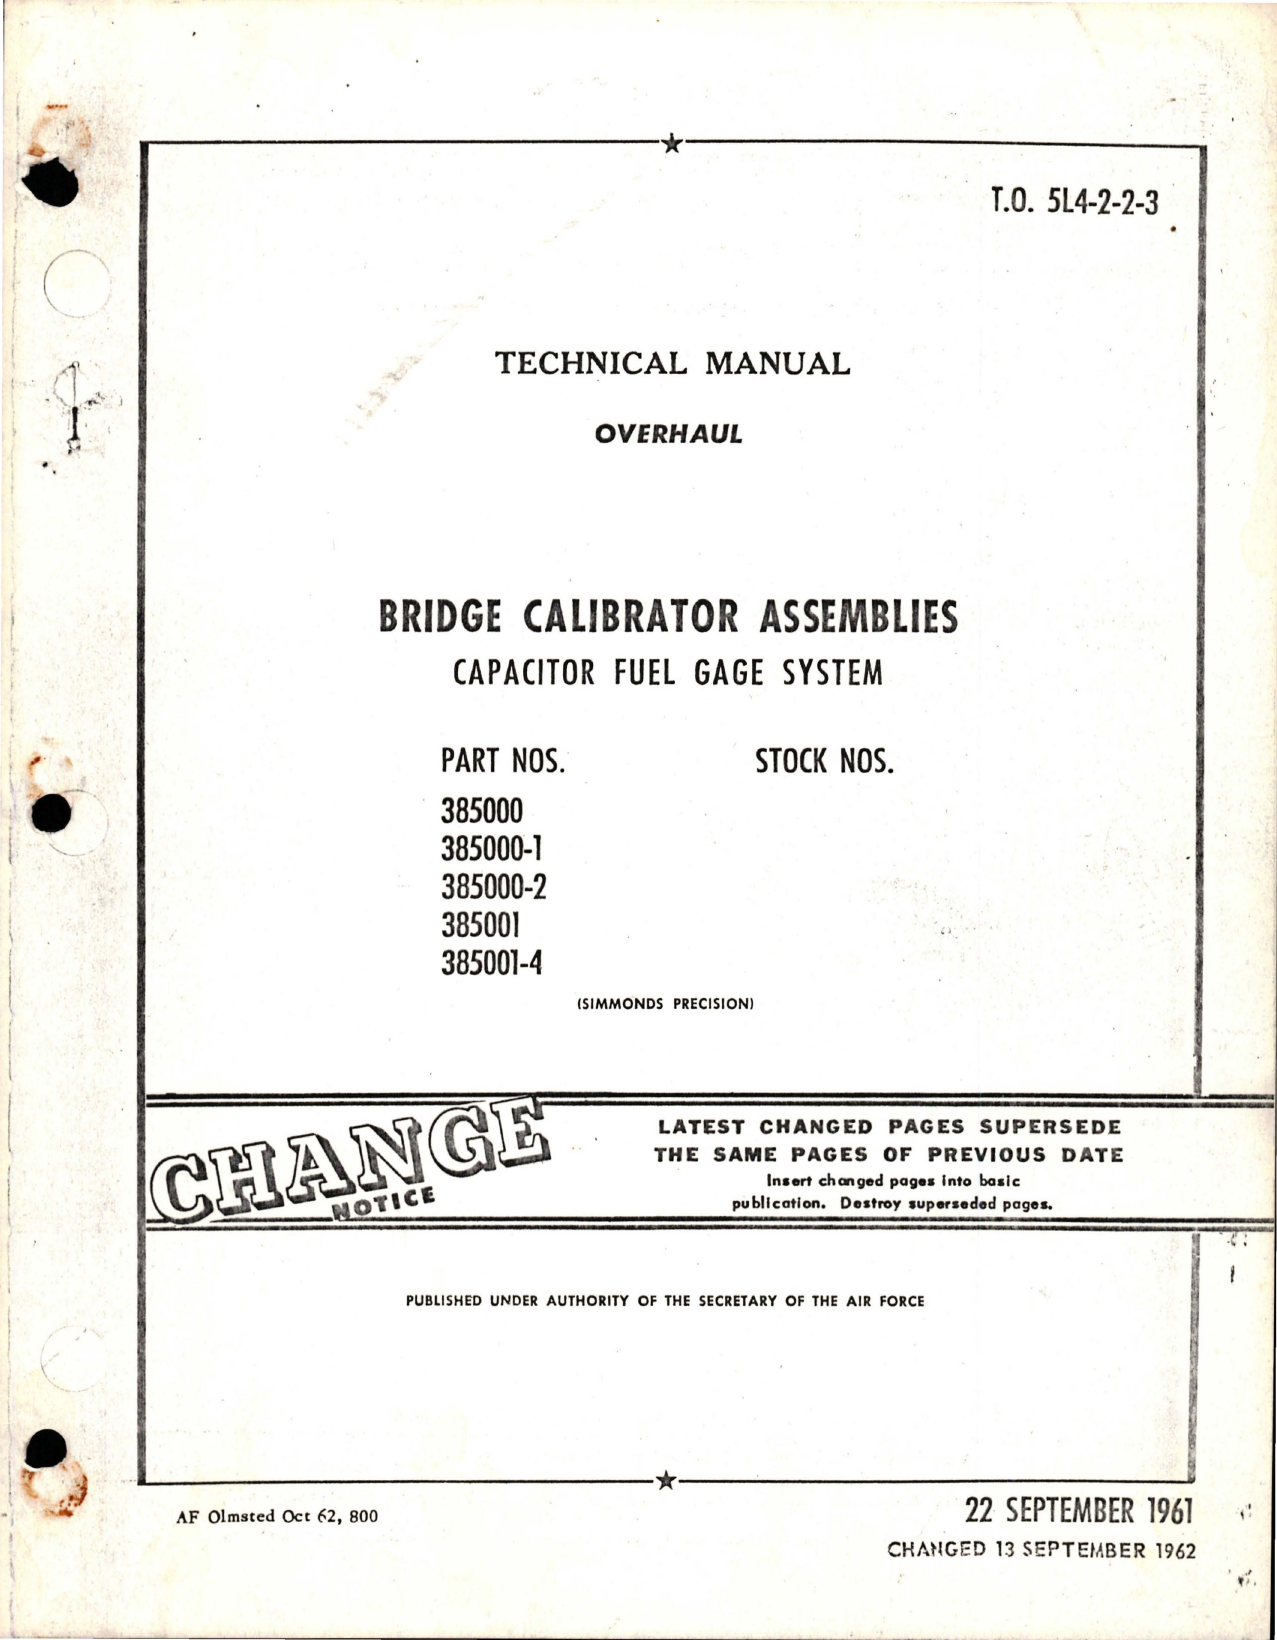 Sample page 1 from AirCorps Library document: Overhaul for Bridge Calibrator Assemblies - Capacitor Fuel Gage System